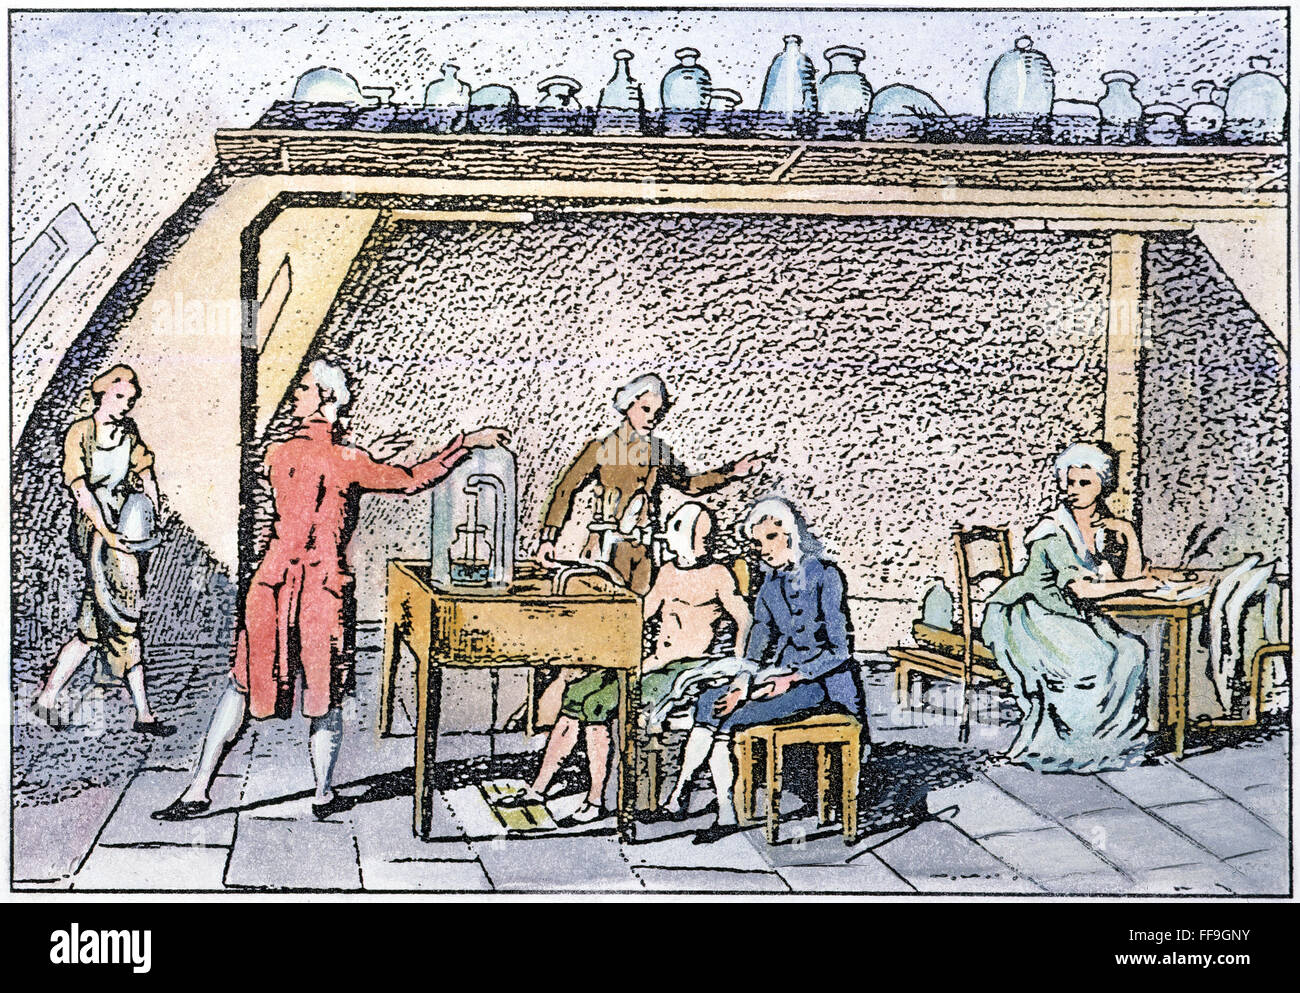 LAVOISIER LABORATORY. /nThe laboratory of Antoine Laurent Lavoisier (1743-1794) who is studying the chemistry of breathing, while Madame Lavoisier, who made the drawing, takes notes at right. Stock Photo